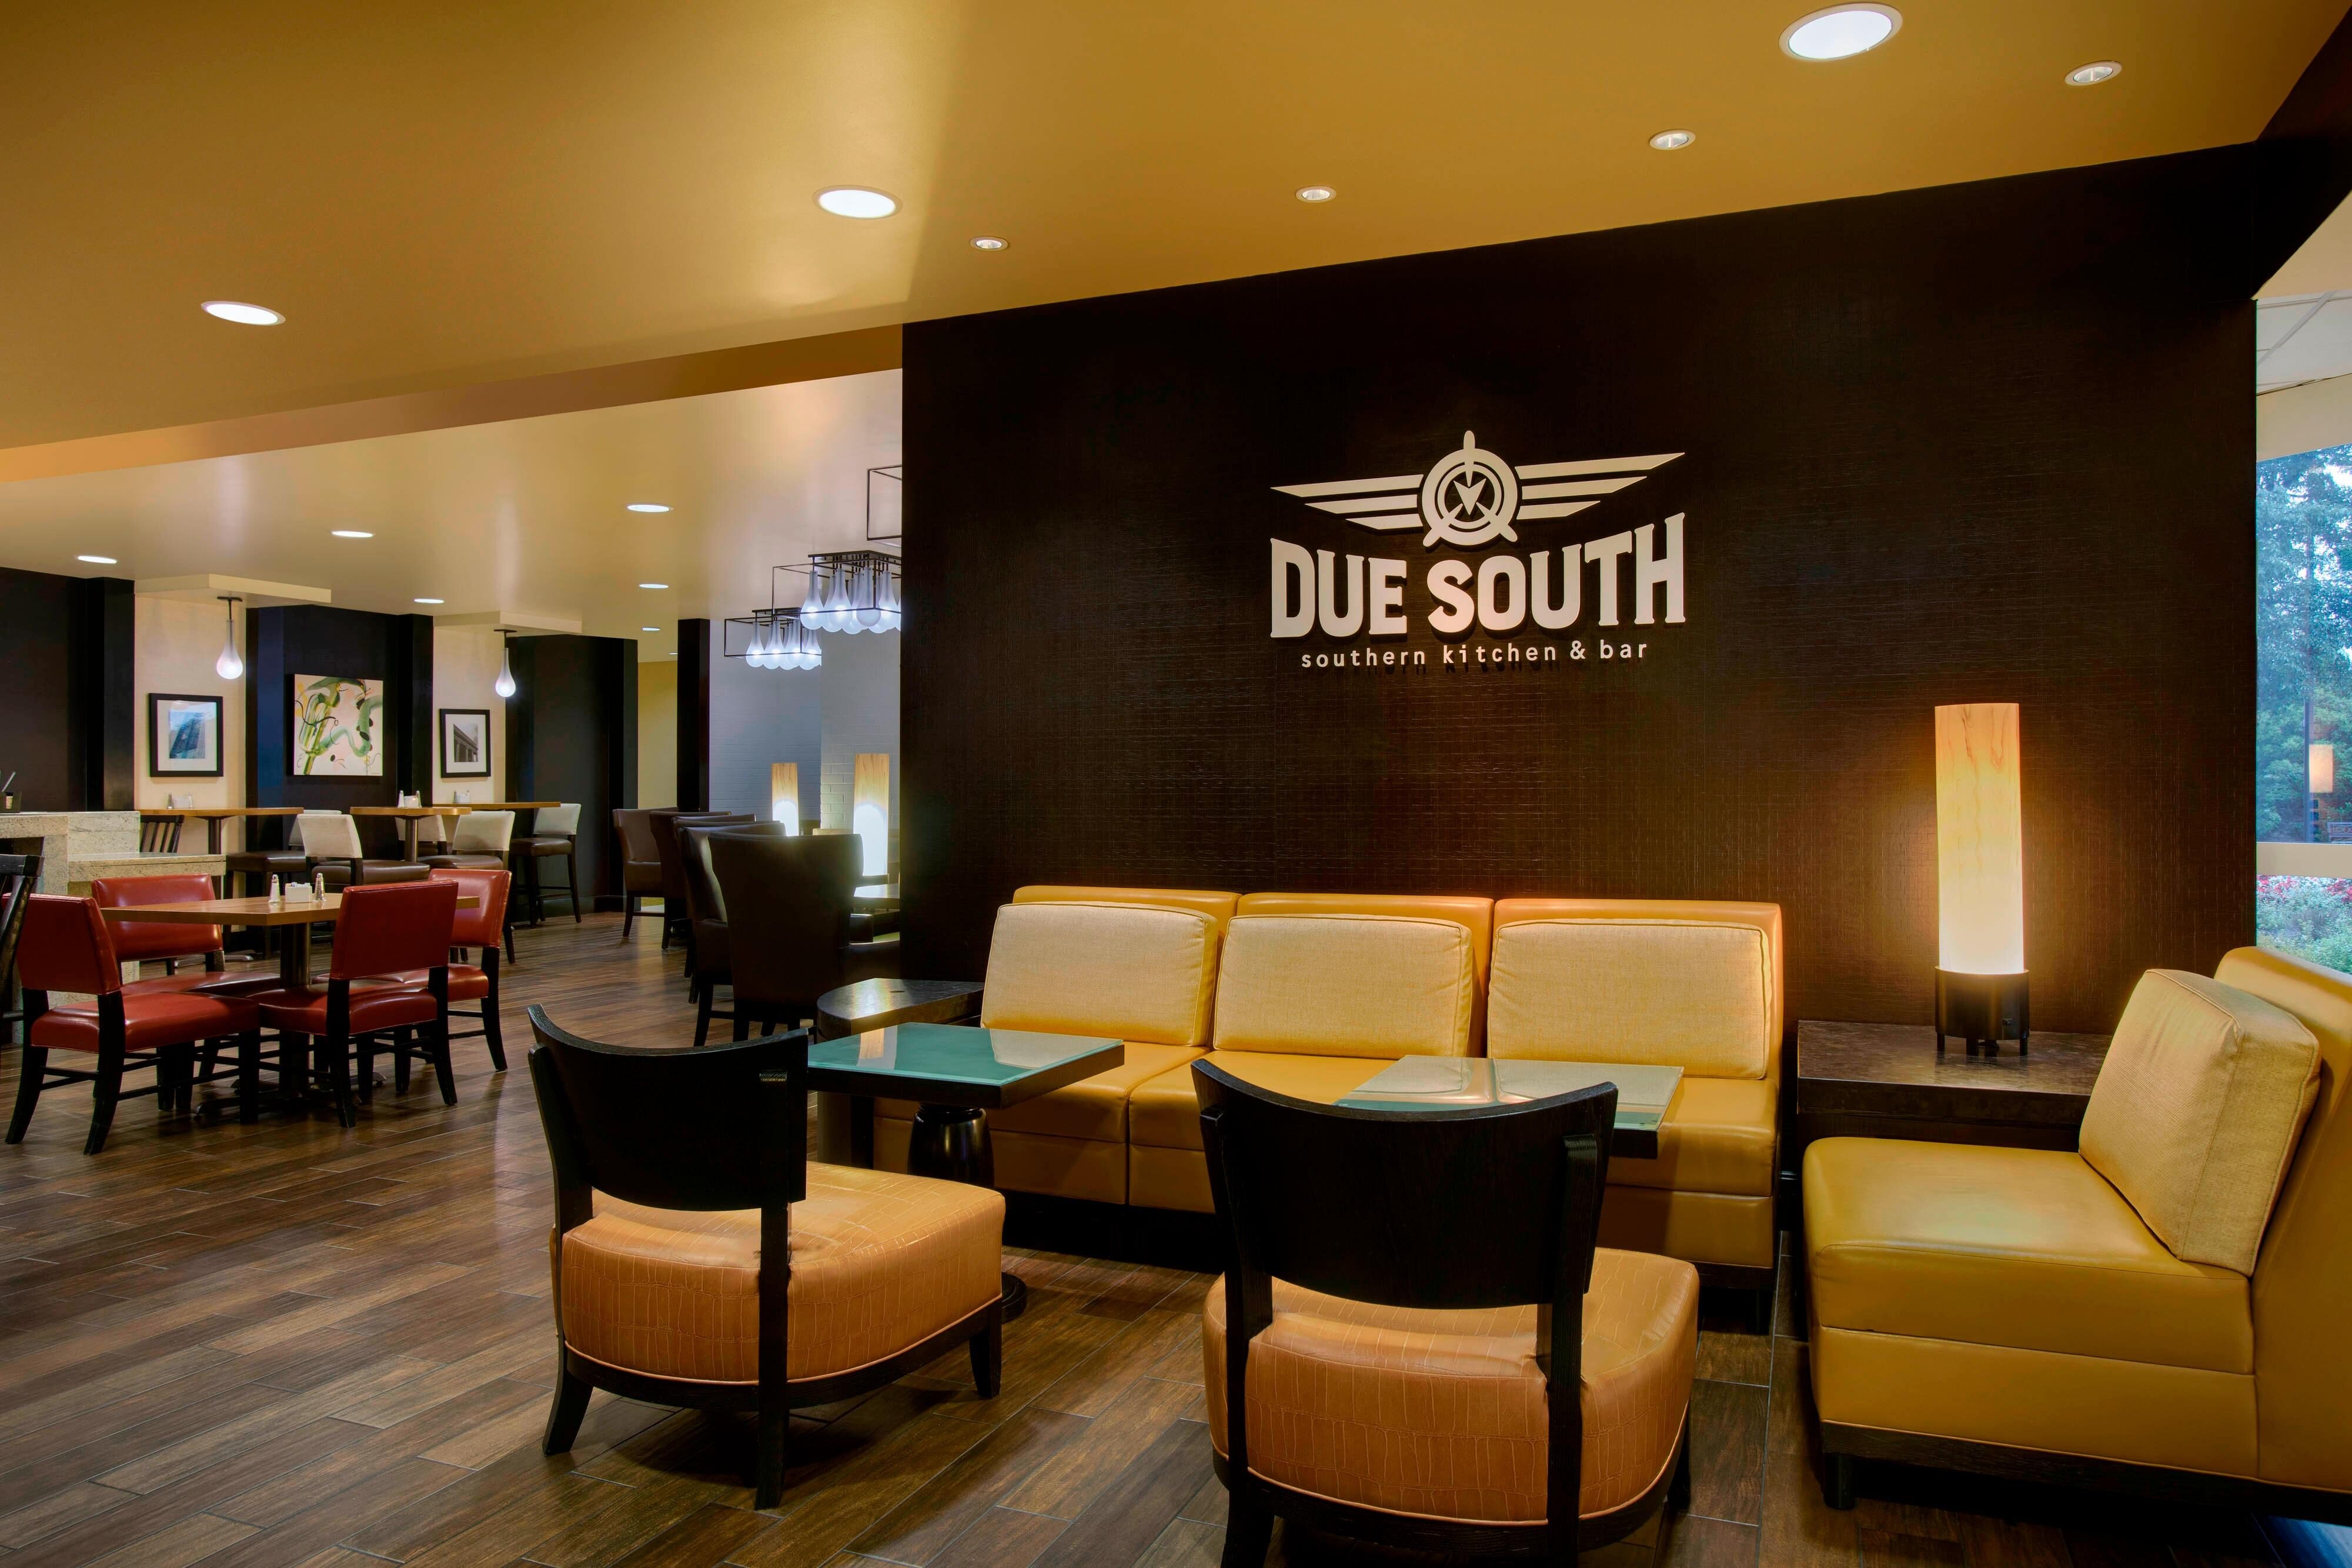 Due South Southern Kitchen & Bar - Seating